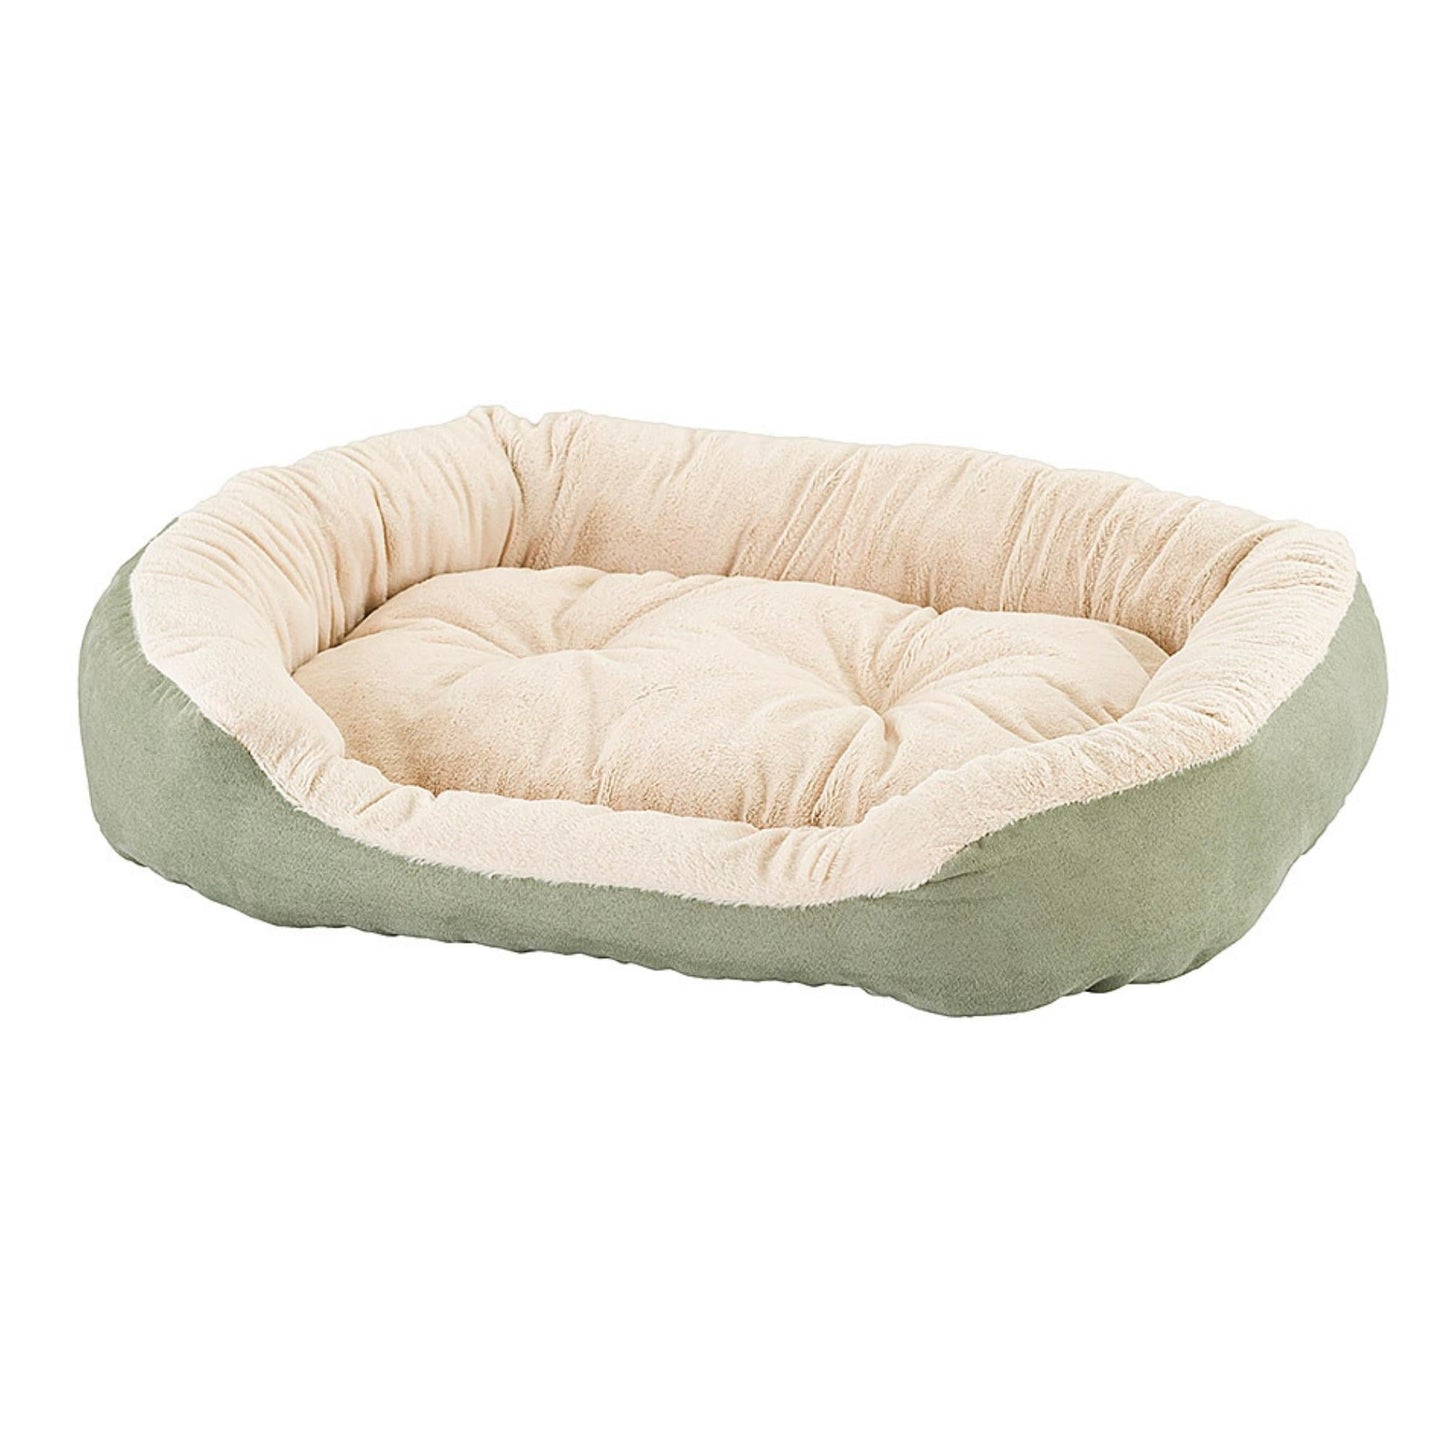 Ethical Pet Sleep Zone Step-In Bed 31" Sage